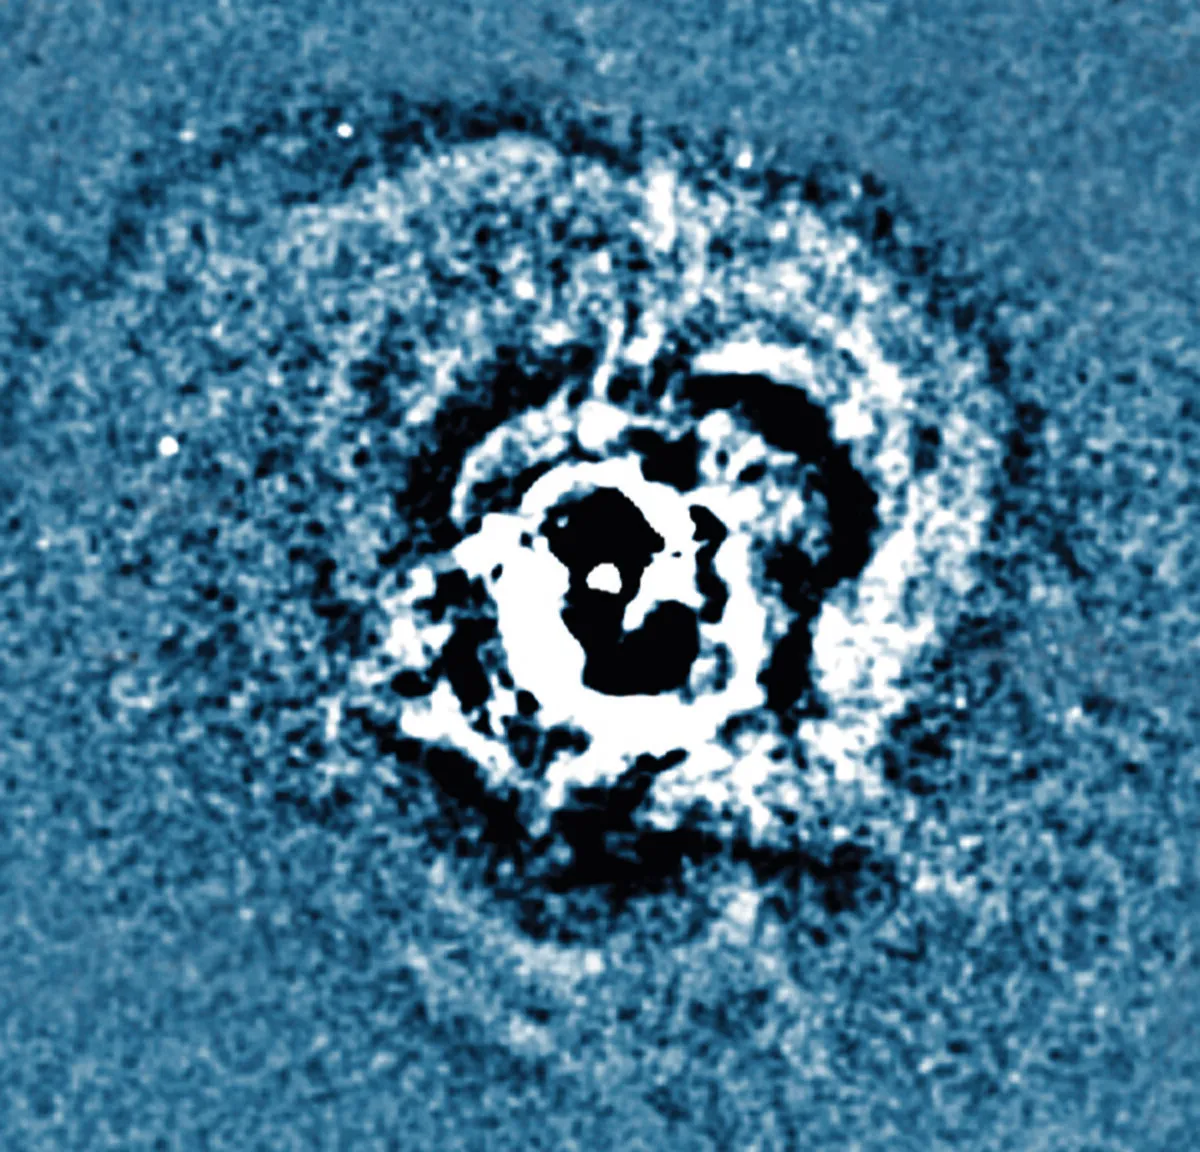 An X-ray image of the Perseus cluster showing sound waves thought to have been produced by a black hole. Credit: NASA/CXC/IoA/A.Fabian et al.